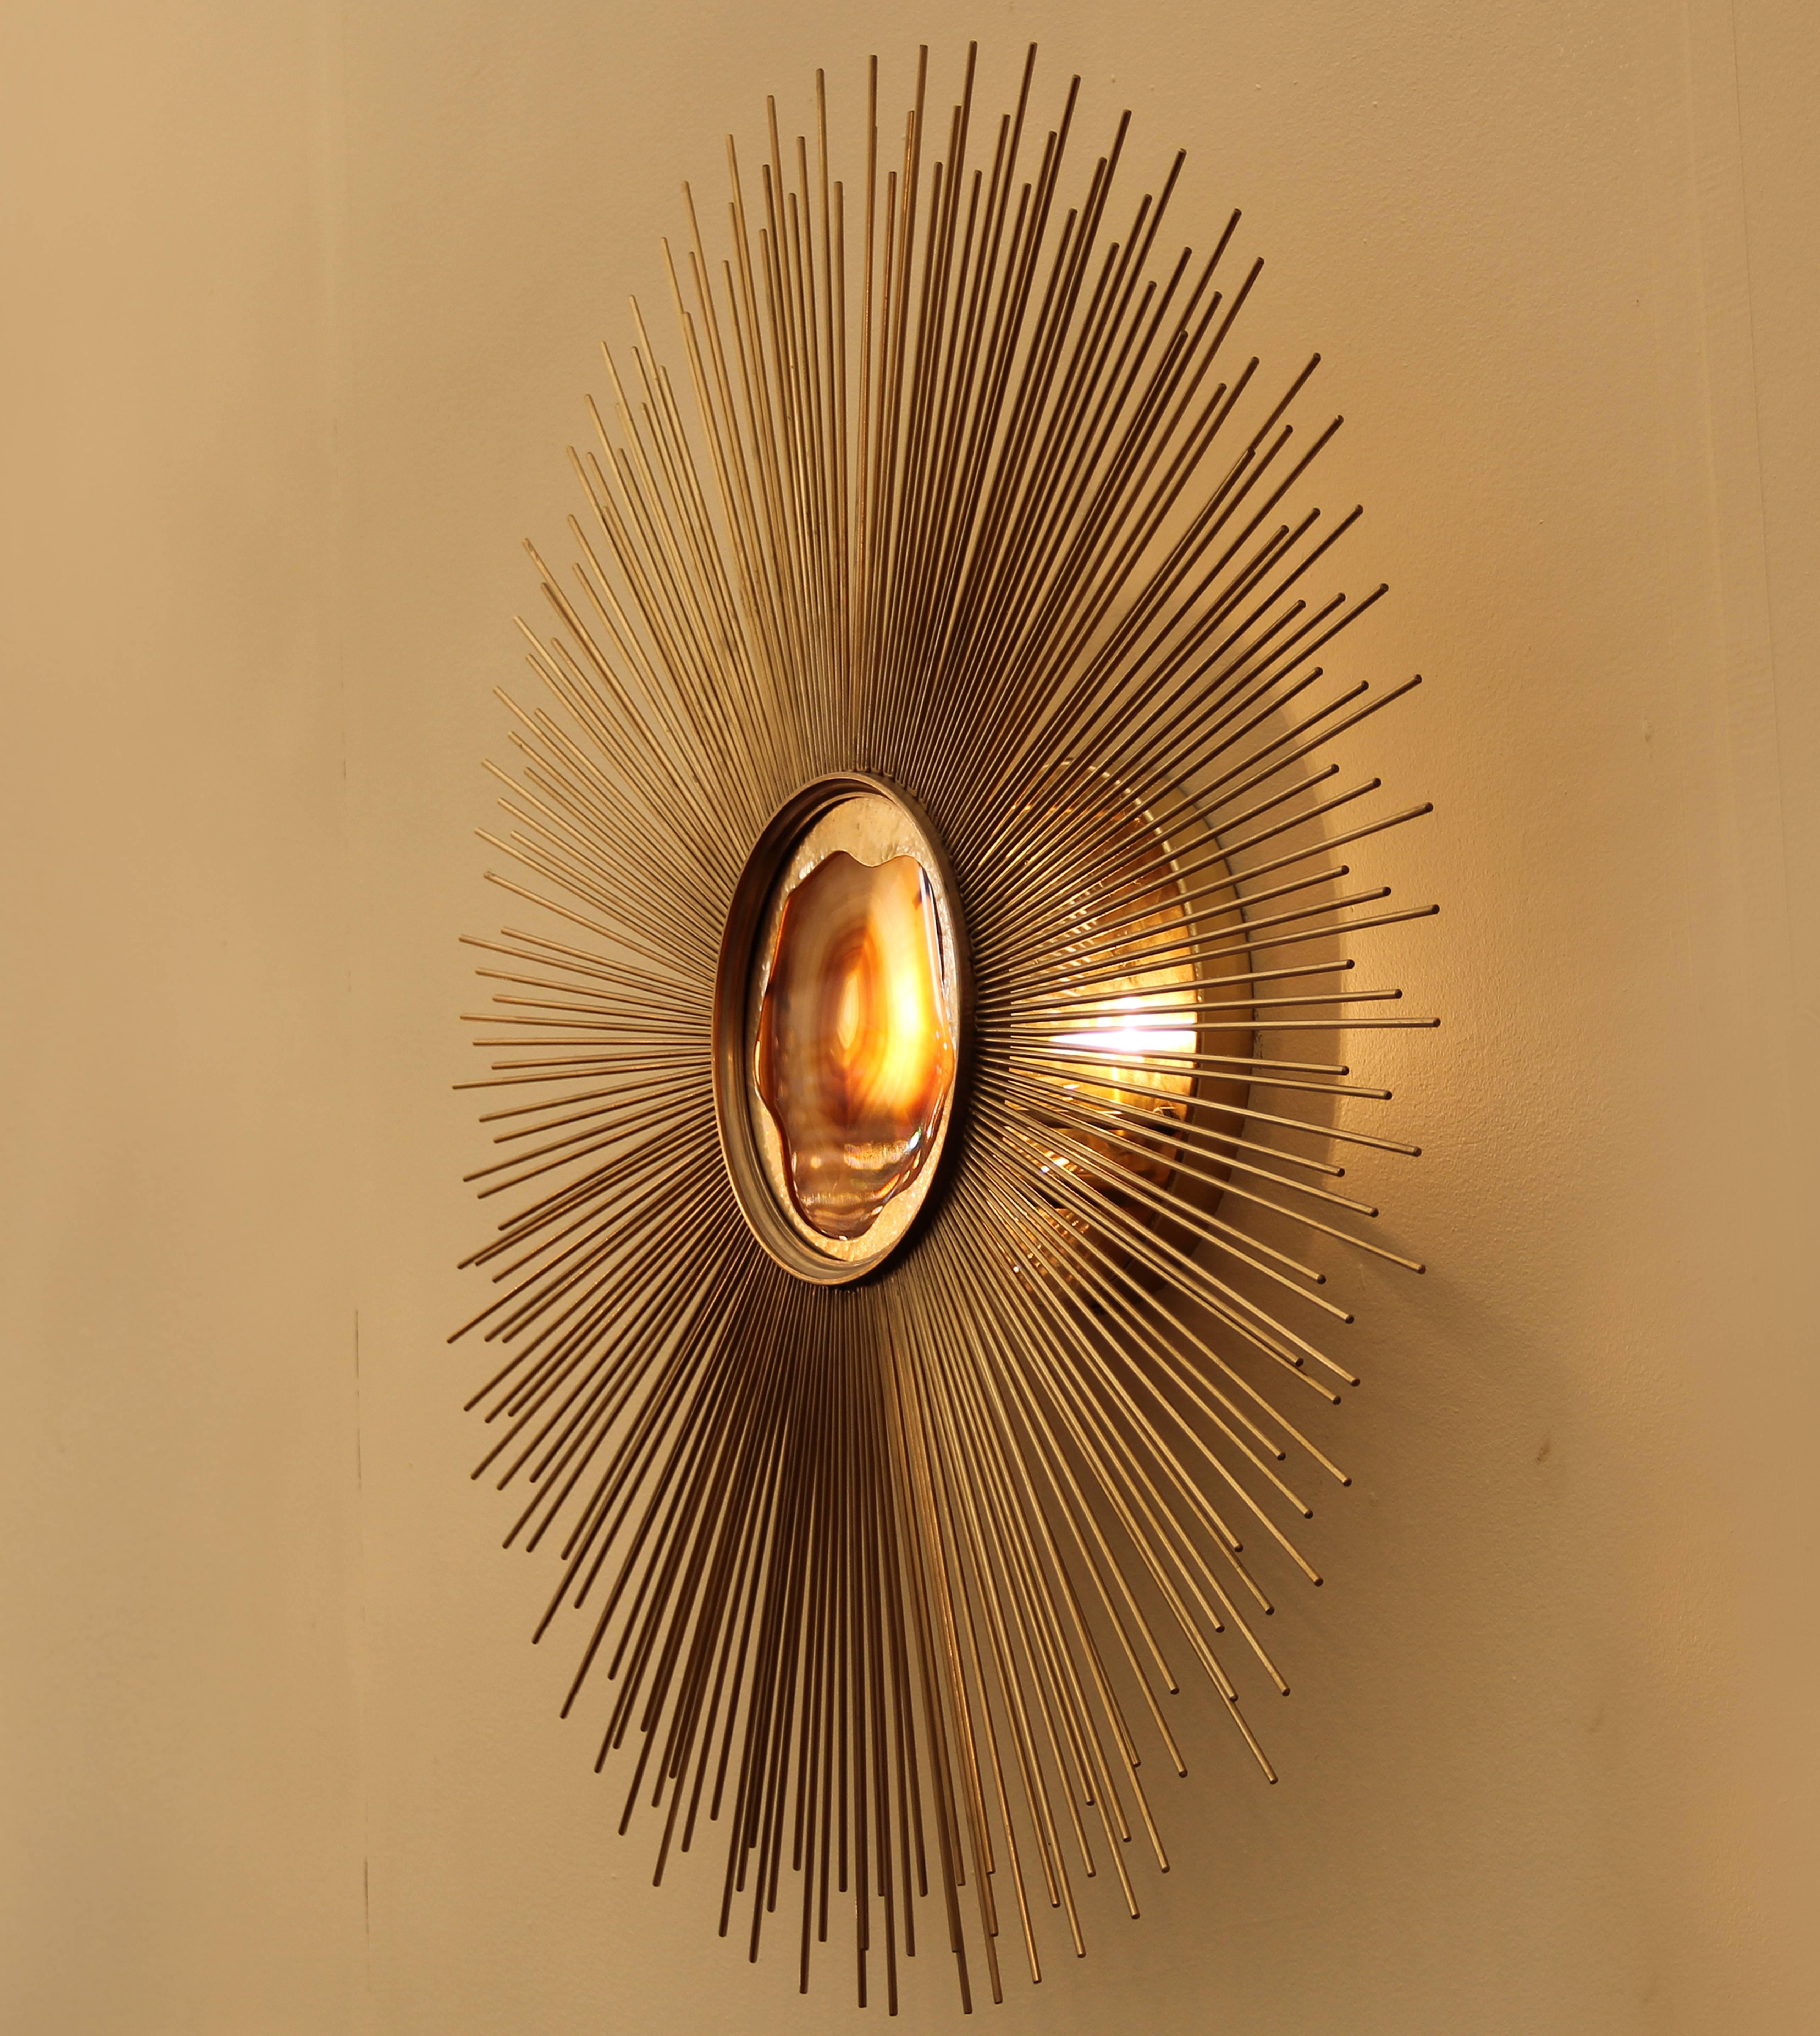 Tantalising tones and exquisite patterns in the agate stones are cast onto gold rays of metal giving this sconce show stopping qualities.

Our hand selected agate stones come in a choice of colors that will show off the structure of the sconce. The